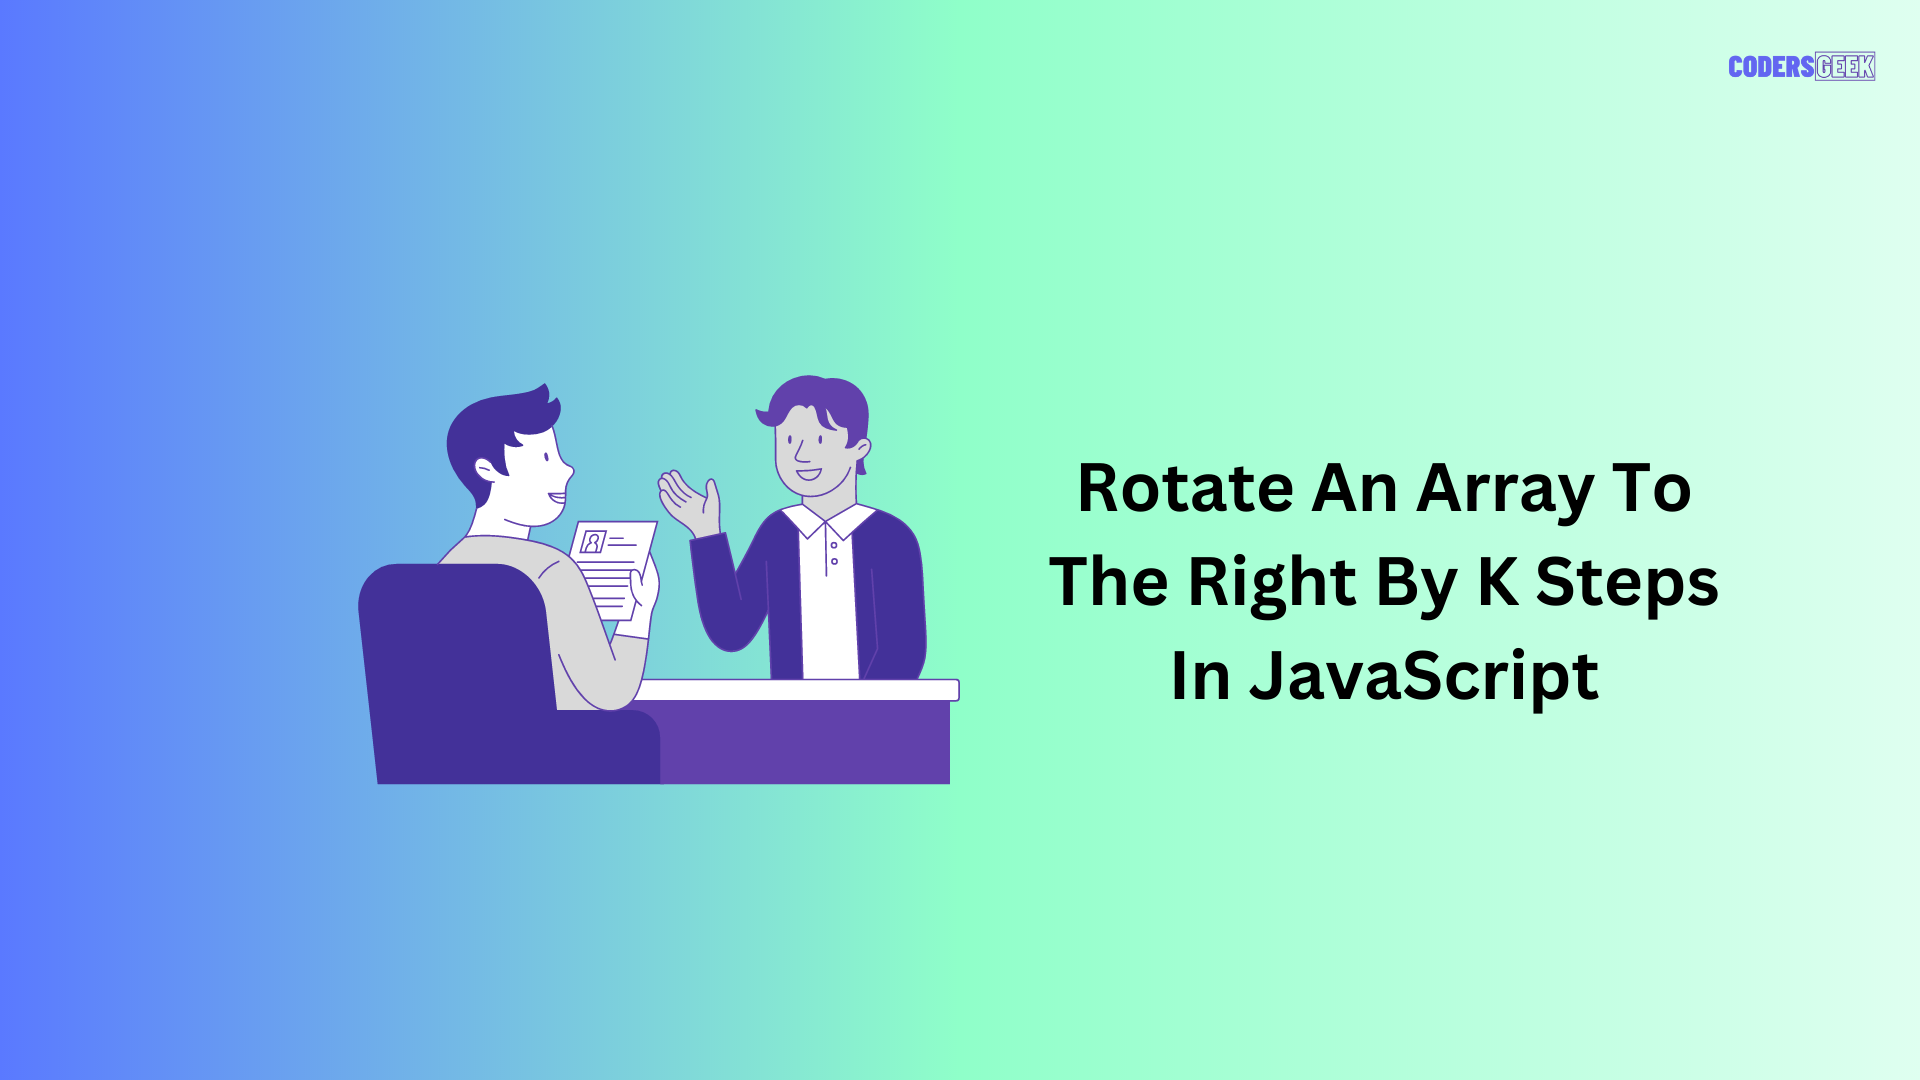 Rotate An Array To The Right By K Steps In JavaScript